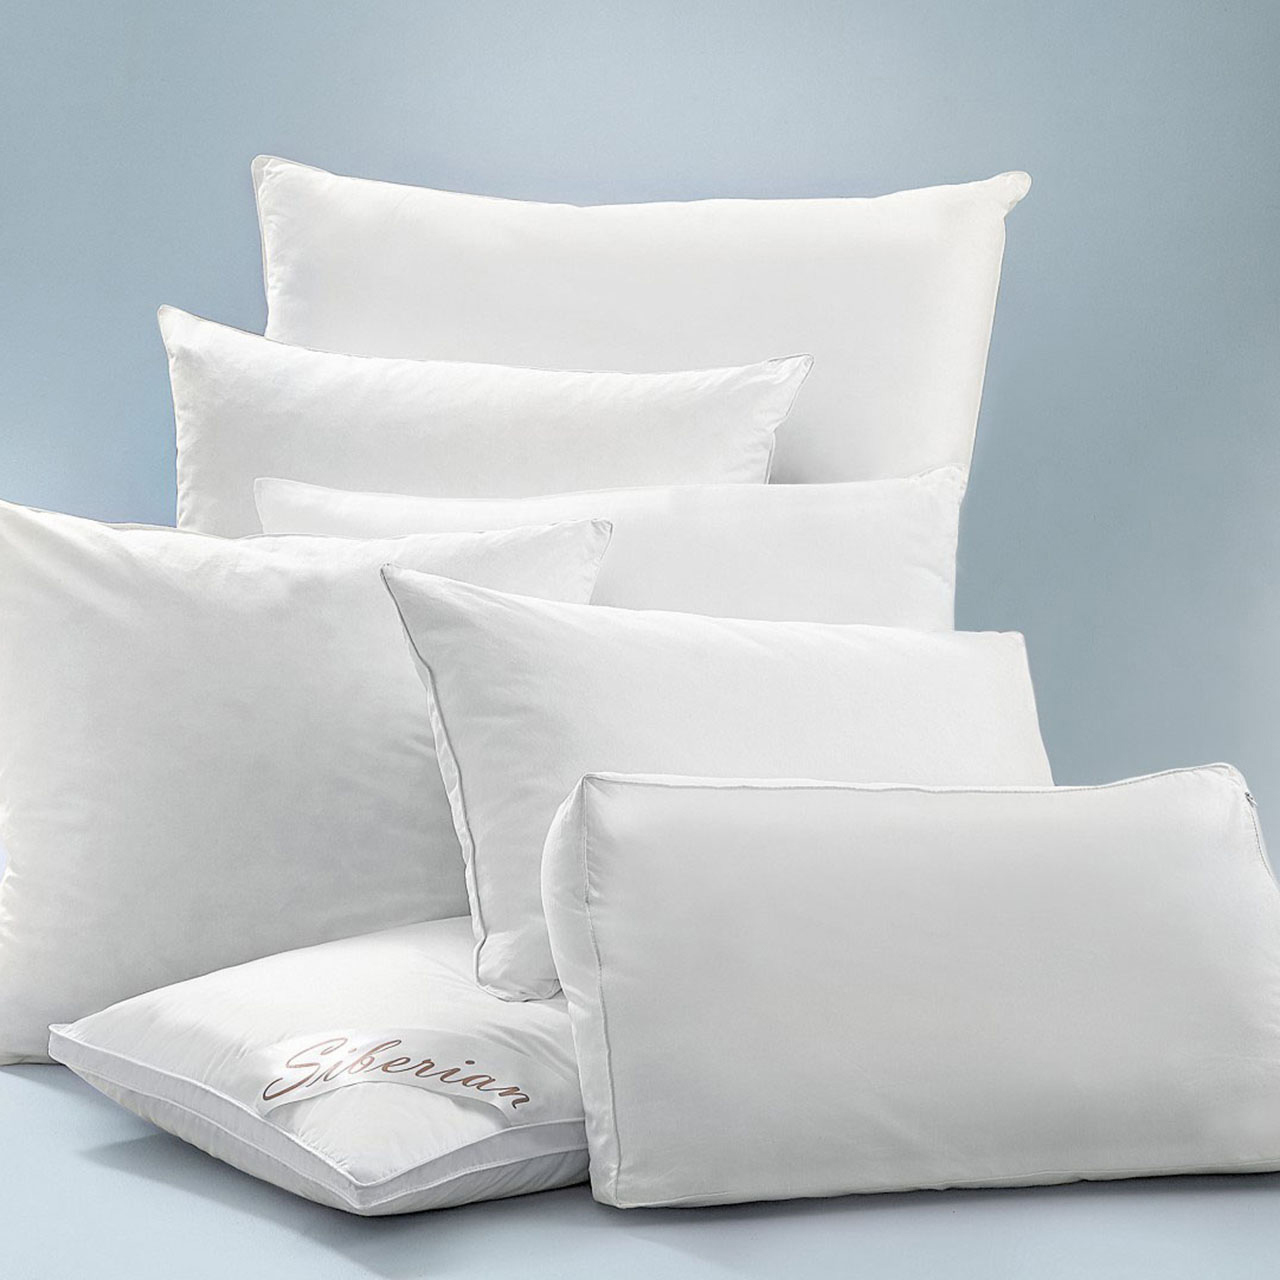 Luxury Legends Goose Feather and Down Pillow